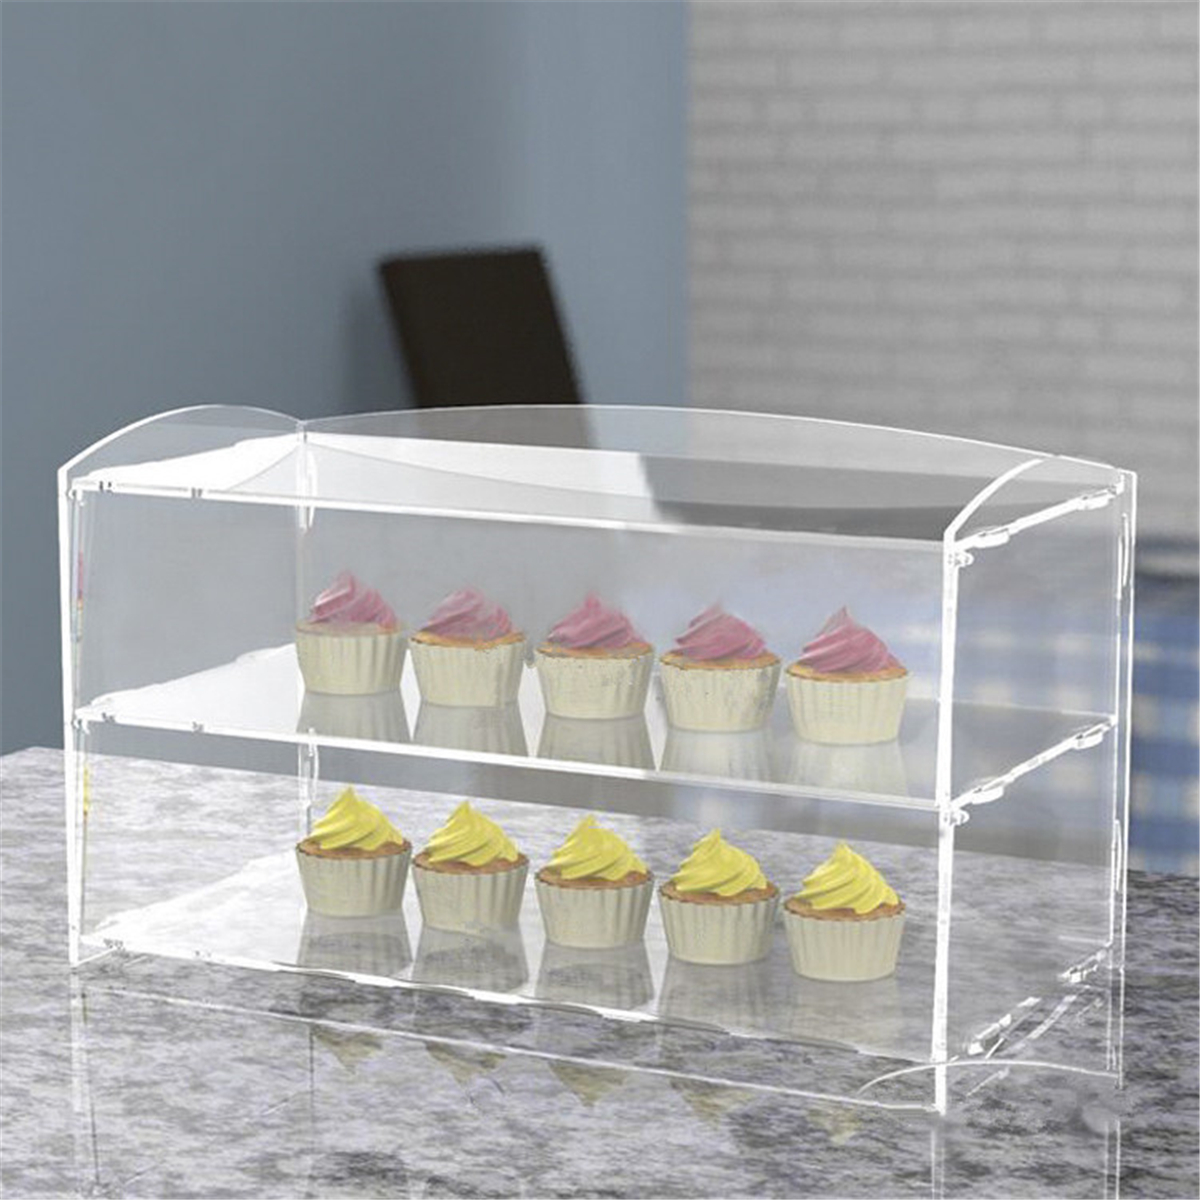 2-Layer-Acrylic-Bakery-Pastry-Display-Box-Case-Cabinet-Cakes-Donuts-Cupcakes-Stand-1547681-3